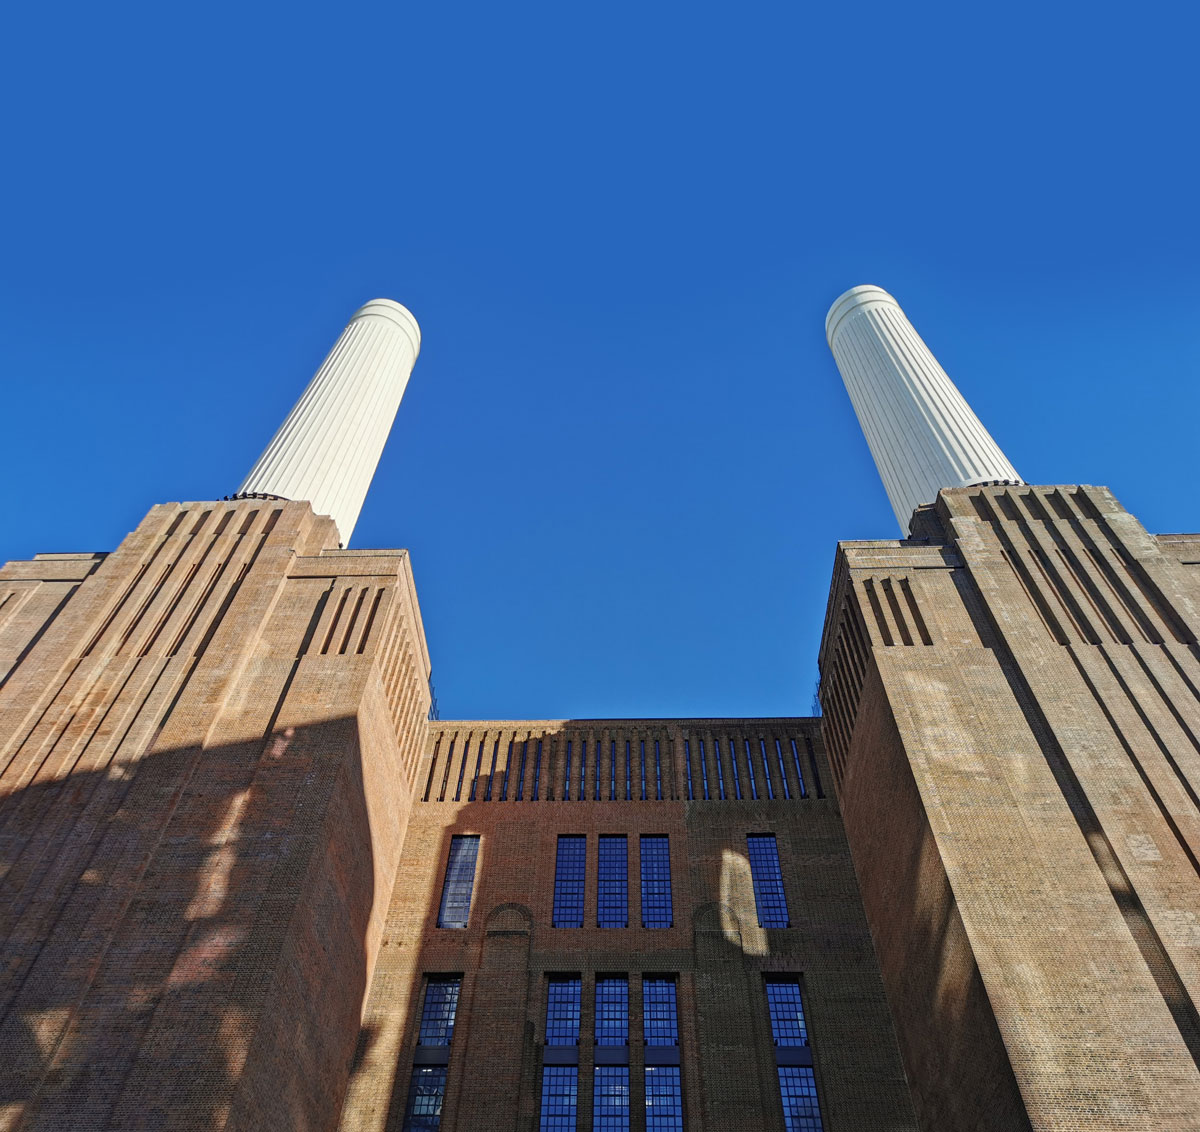 The towers at Battersea Power Station